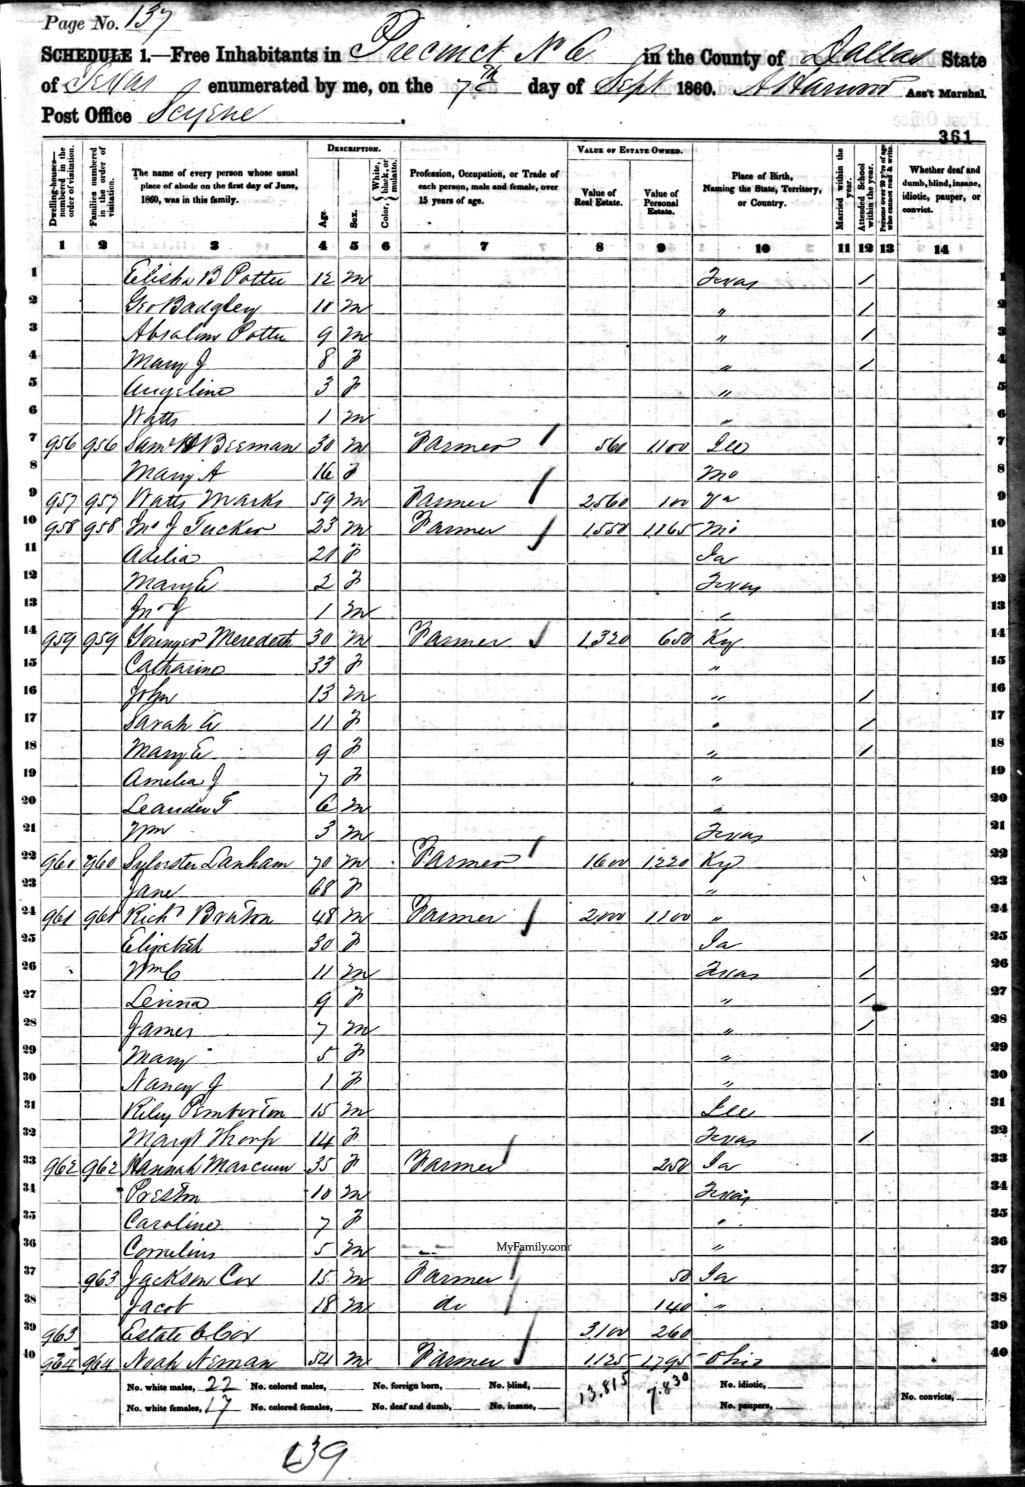 scan of a page from the census